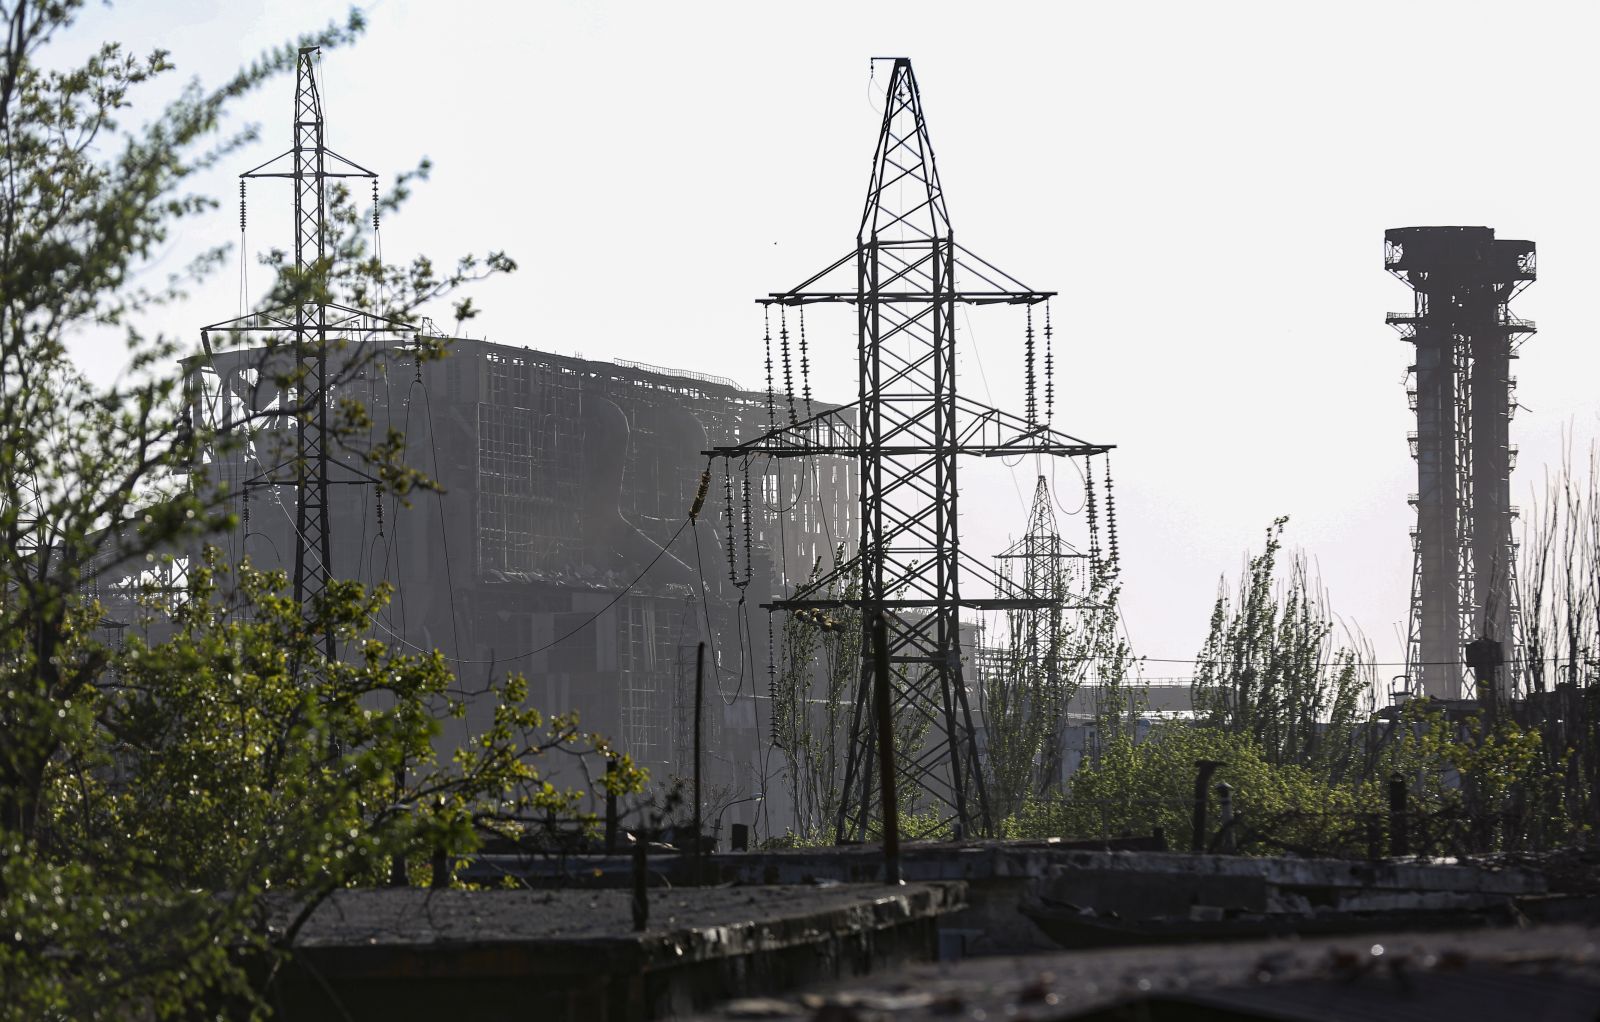 epa09965029 A general view of Azovstal steel plant in Mariupol, Ukraine, 21 May 2022 (issued 22 May 2022). The Chief spokesman of the Russian Defense Ministry, Major General Igor Konashenkov, said on 20 May that the long-besieged Azovstal steel plant in Mariupol was under full Russian army control.  EPA/ALESSANDRO GUERRA